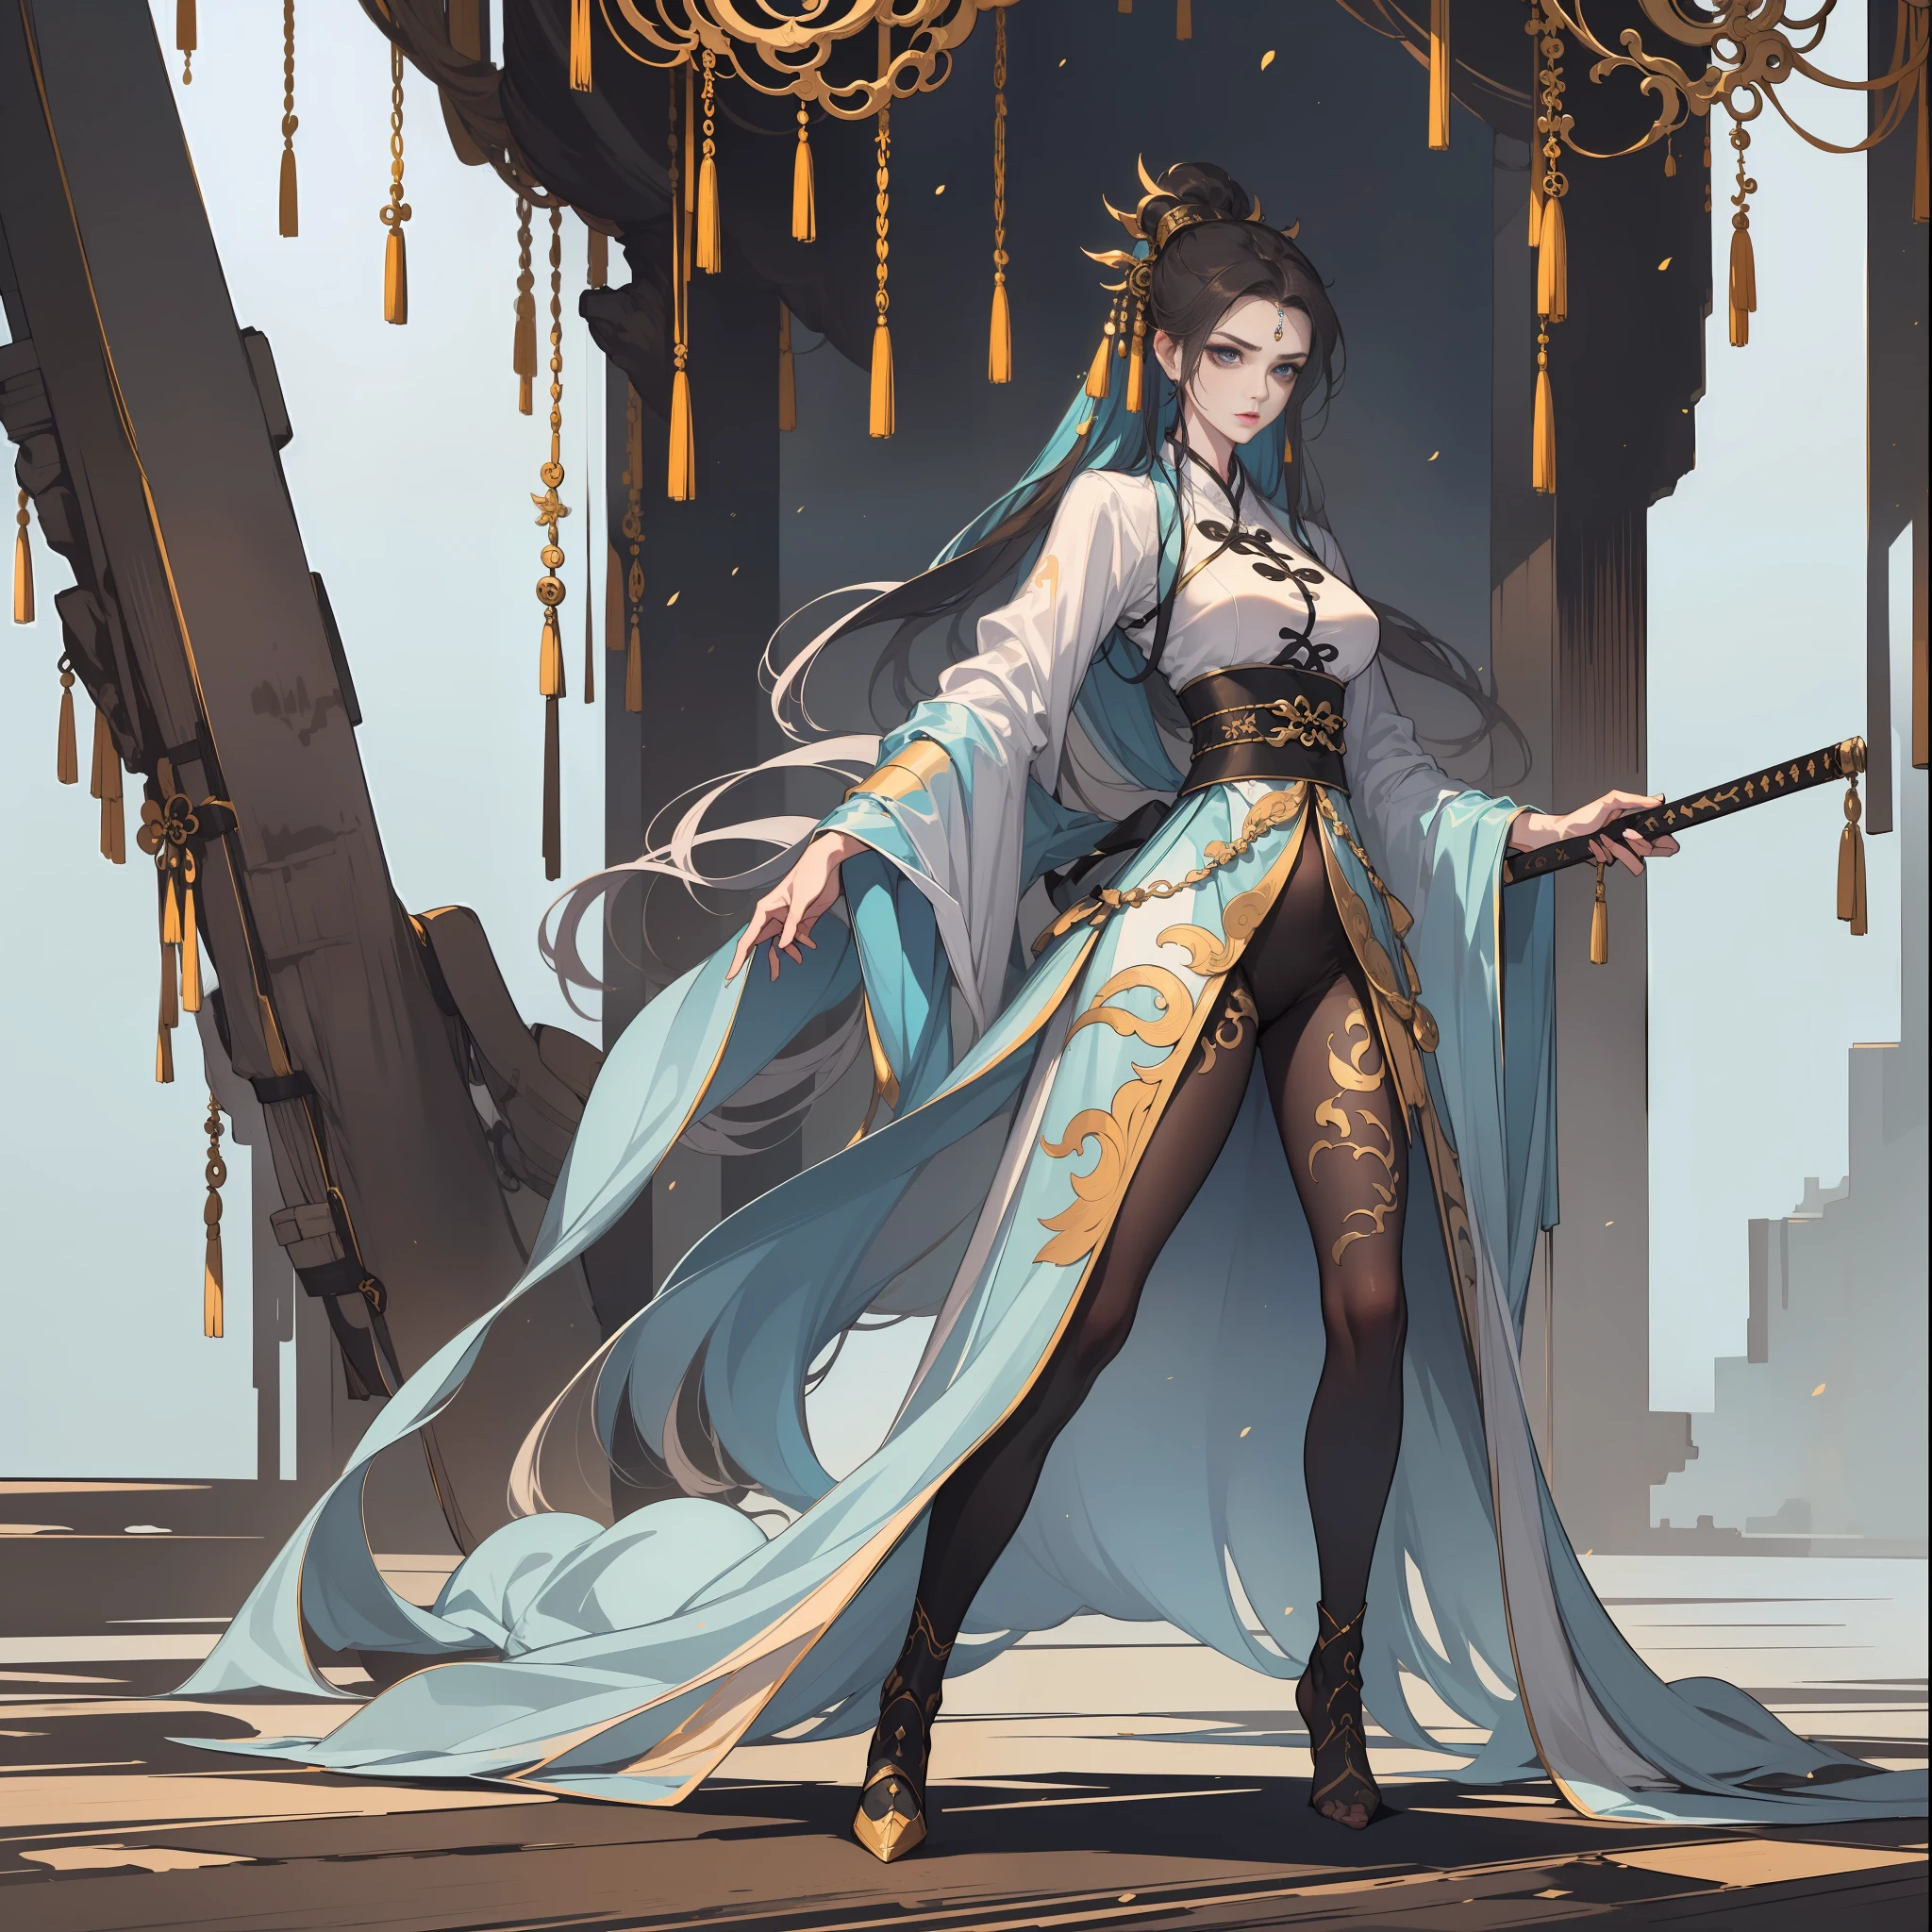 (quality:super high image quality+Vivid and natural standing colors),(Graphic style:Xianxia+narrative+Beautiful),(Presentation modus:Magnificent+Combative),(Scenes:An ethereal and secluded void),(figure:A woman with a beautiful figure),(Character characteristics:Full of fairy+exaggerated poses+holding a longsword+White shirt),(Background with:white backgrounid),(shot of:full body shot shot)